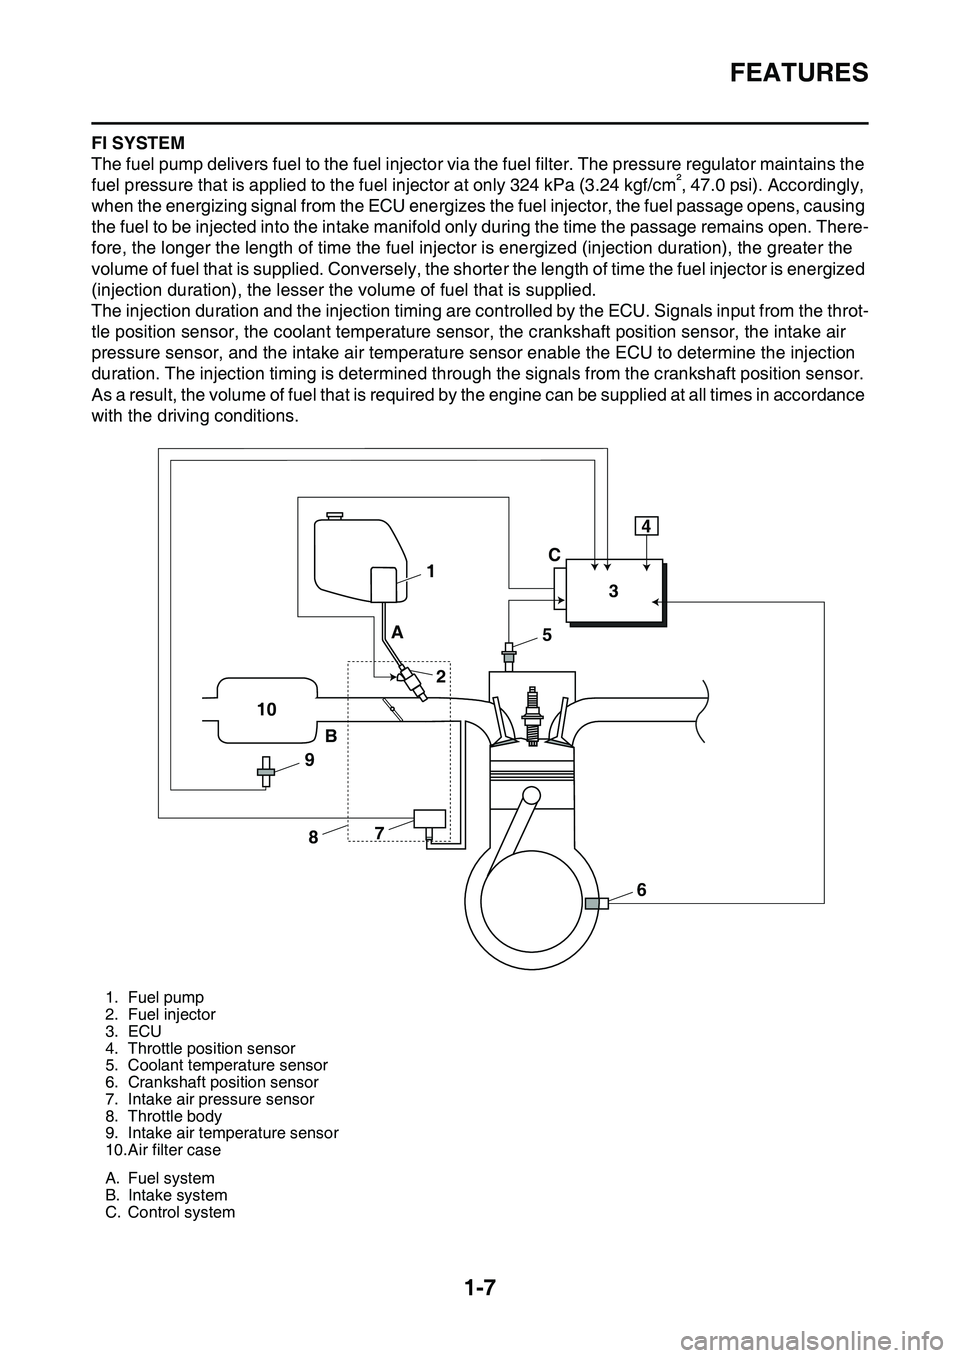 YAMAHA YZ450F 2014  Owners Manual FEATURES
1-7
FI SYSTEM
The fuel pump delivers fuel to the fuel injector via the fuel filter. The pressure regulator maintains the 
fuel pressure that is applied to the fuel injector at only 324 kPa (3